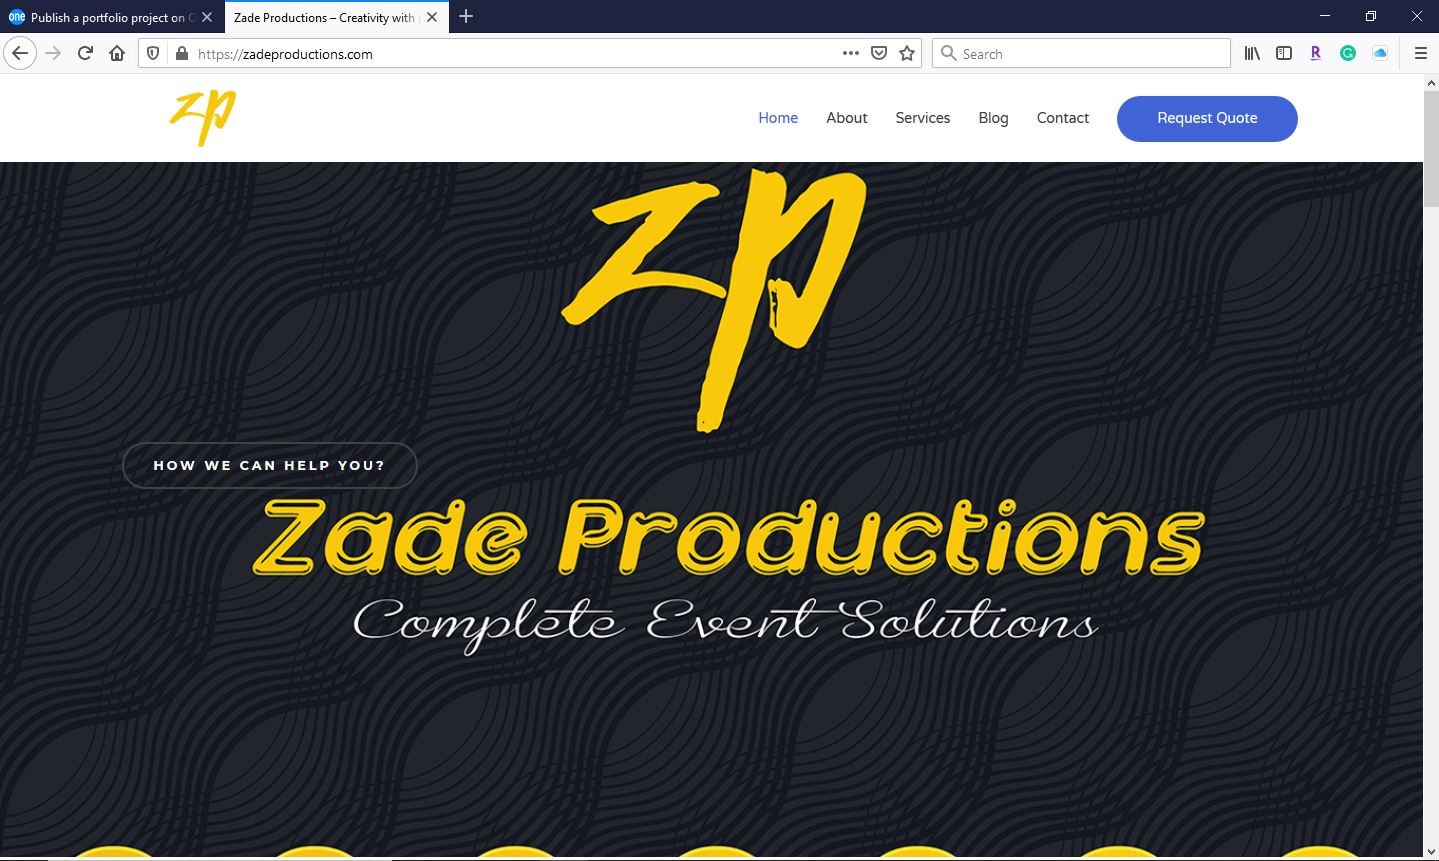 As a premium event coordination company in Karachi, Zade Productions is your one stop shop for wedding planner and event coordination. We take the headache out of trying to choose the best professionals, coordinating attendee lists, and developing an event that everyone will remember.